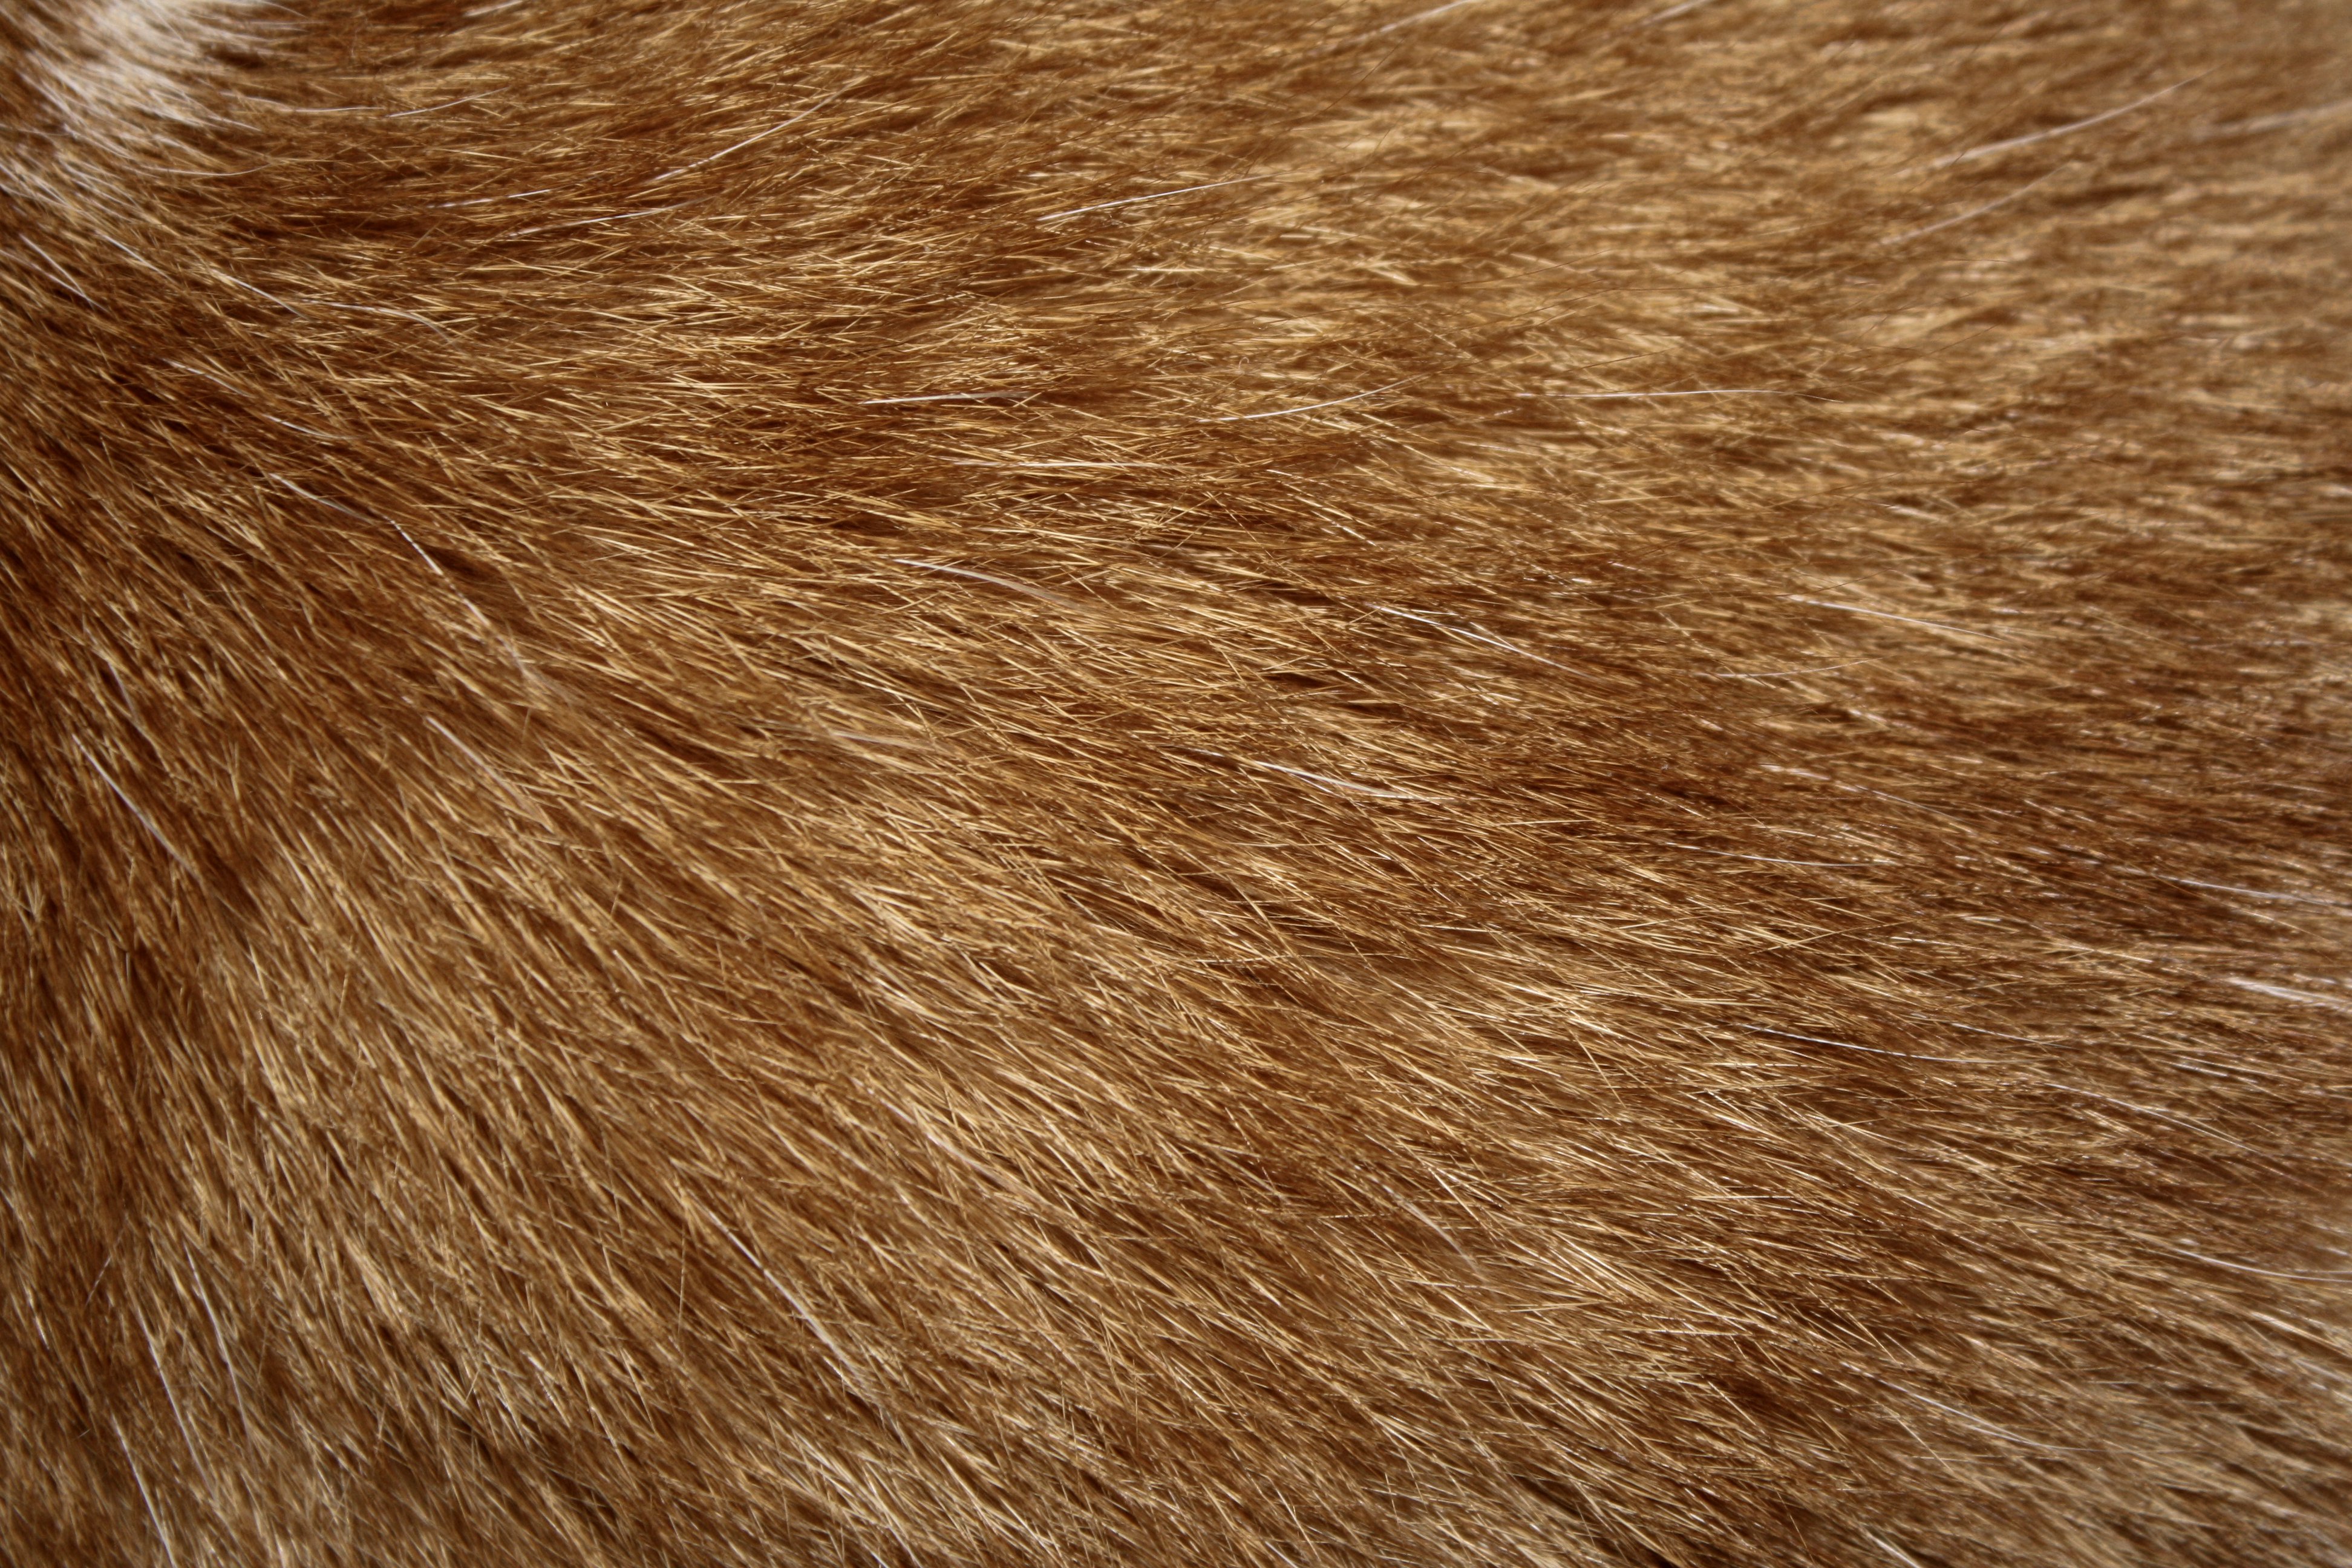 Brown Cat Fur Texture Picture, Free Photograph